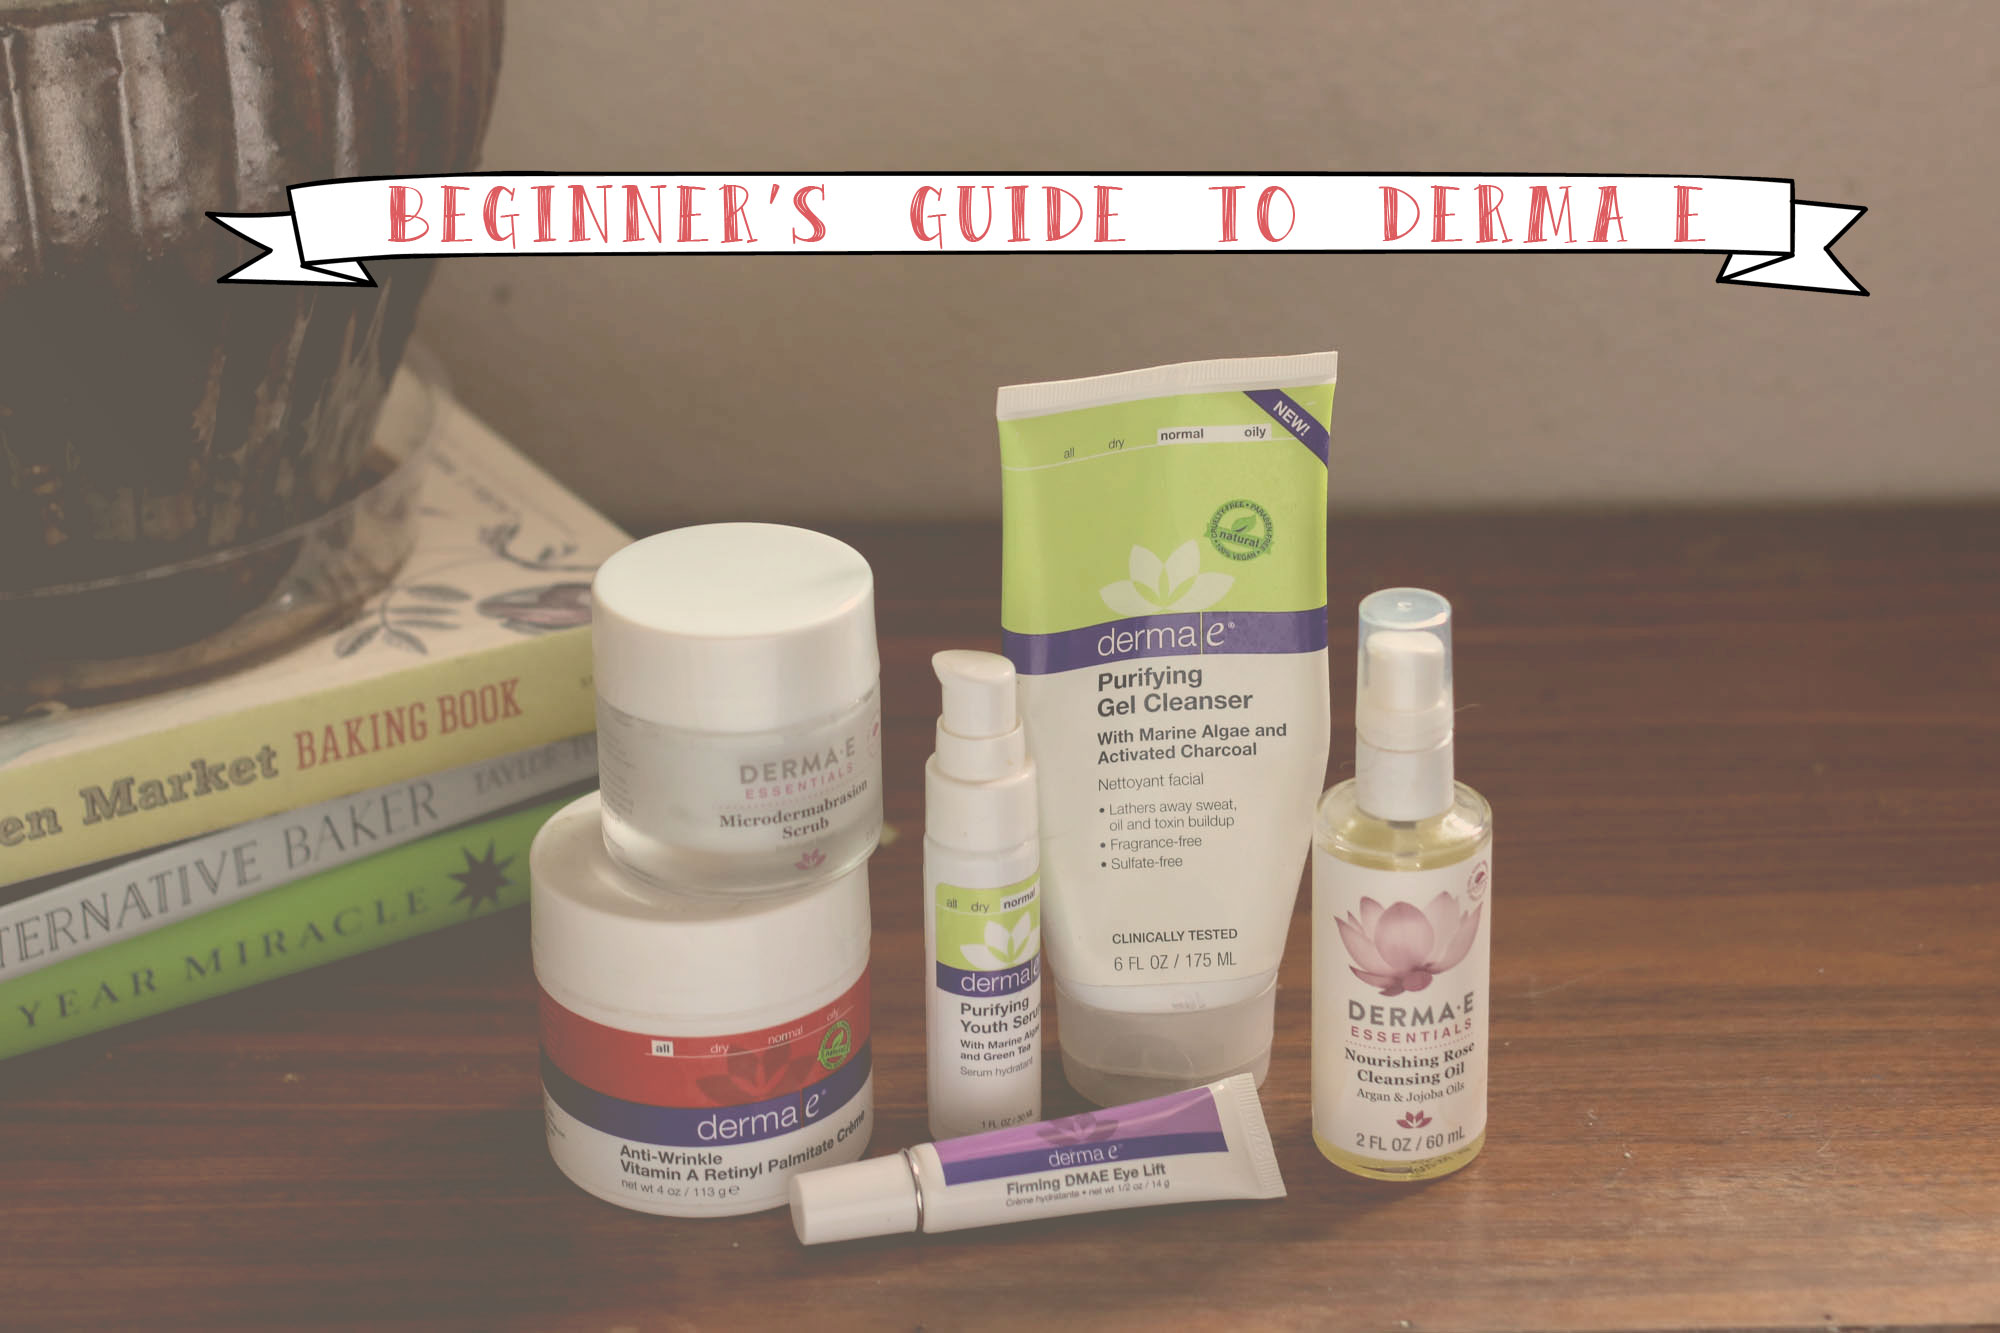 A Beginners Guide To Derma E Affordable Ethical Skincare